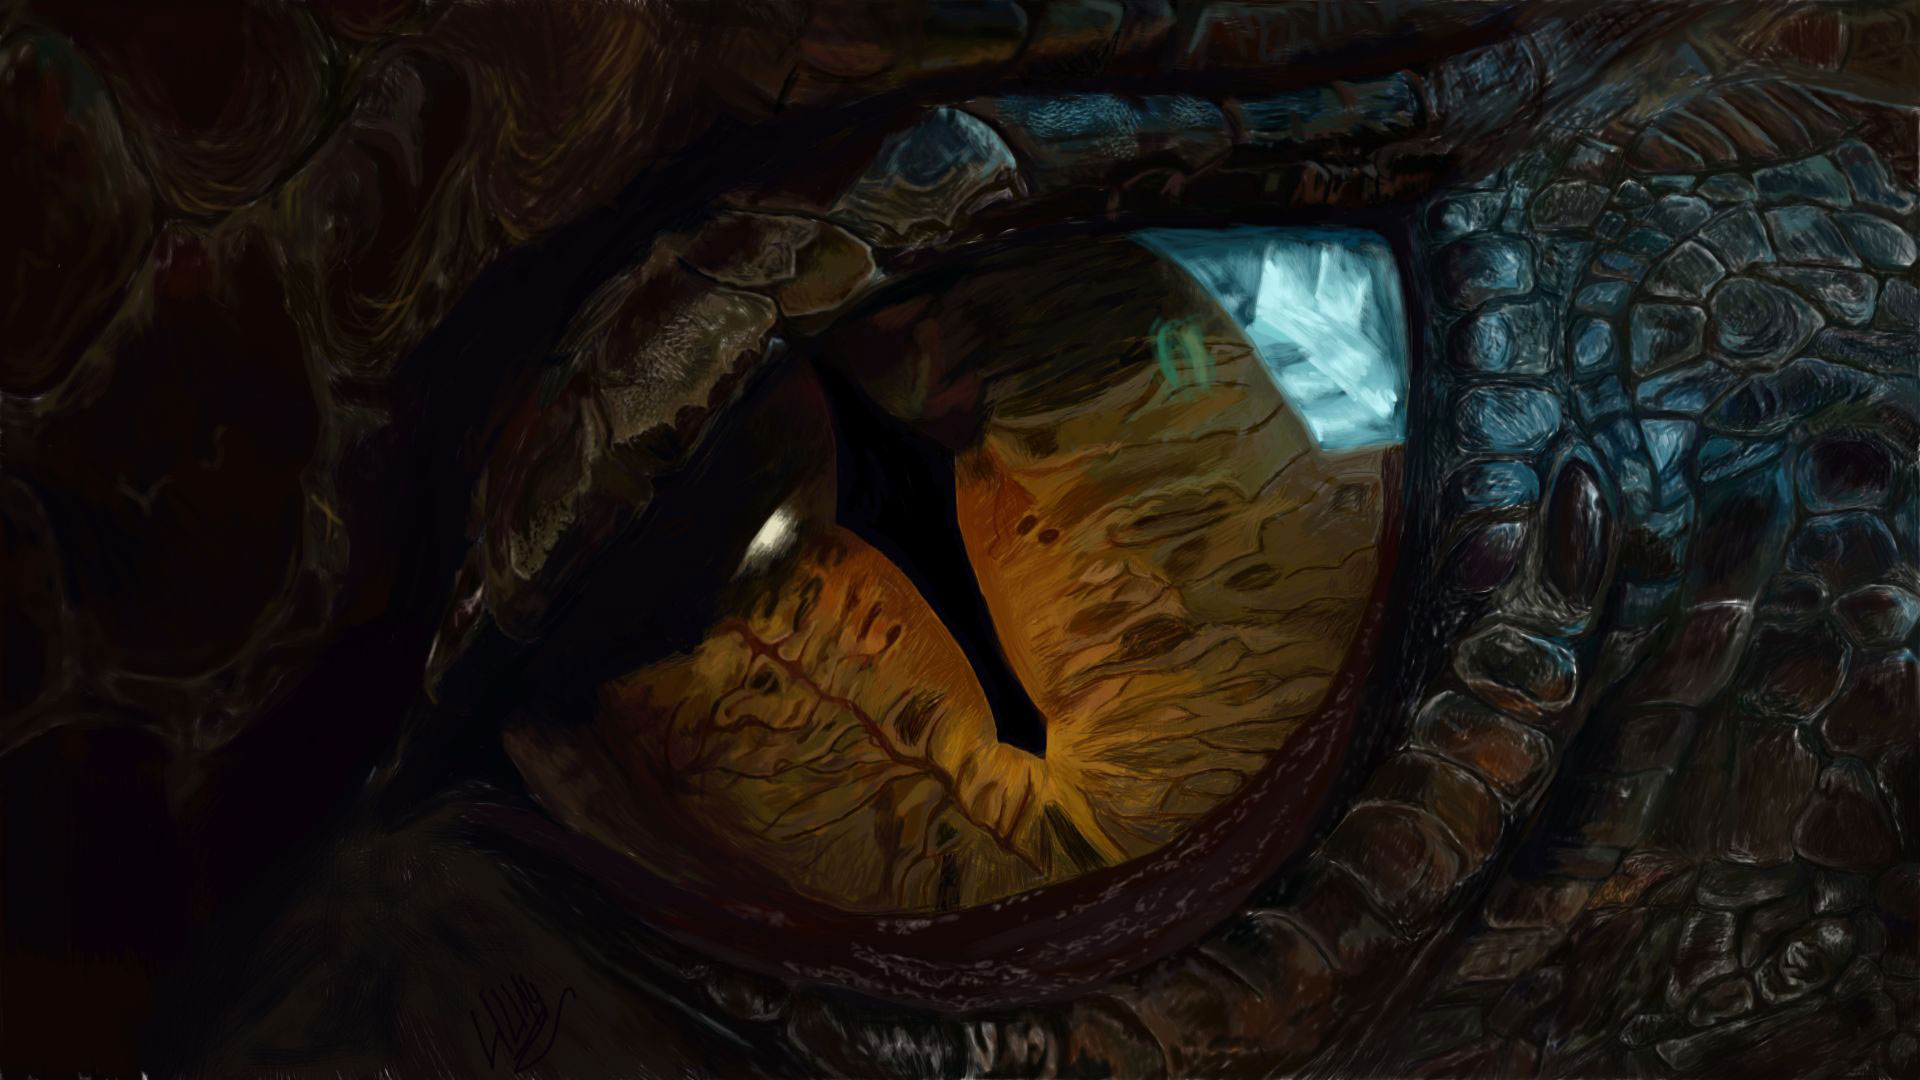 smaug the dragon from the hobbit movie wallpaper